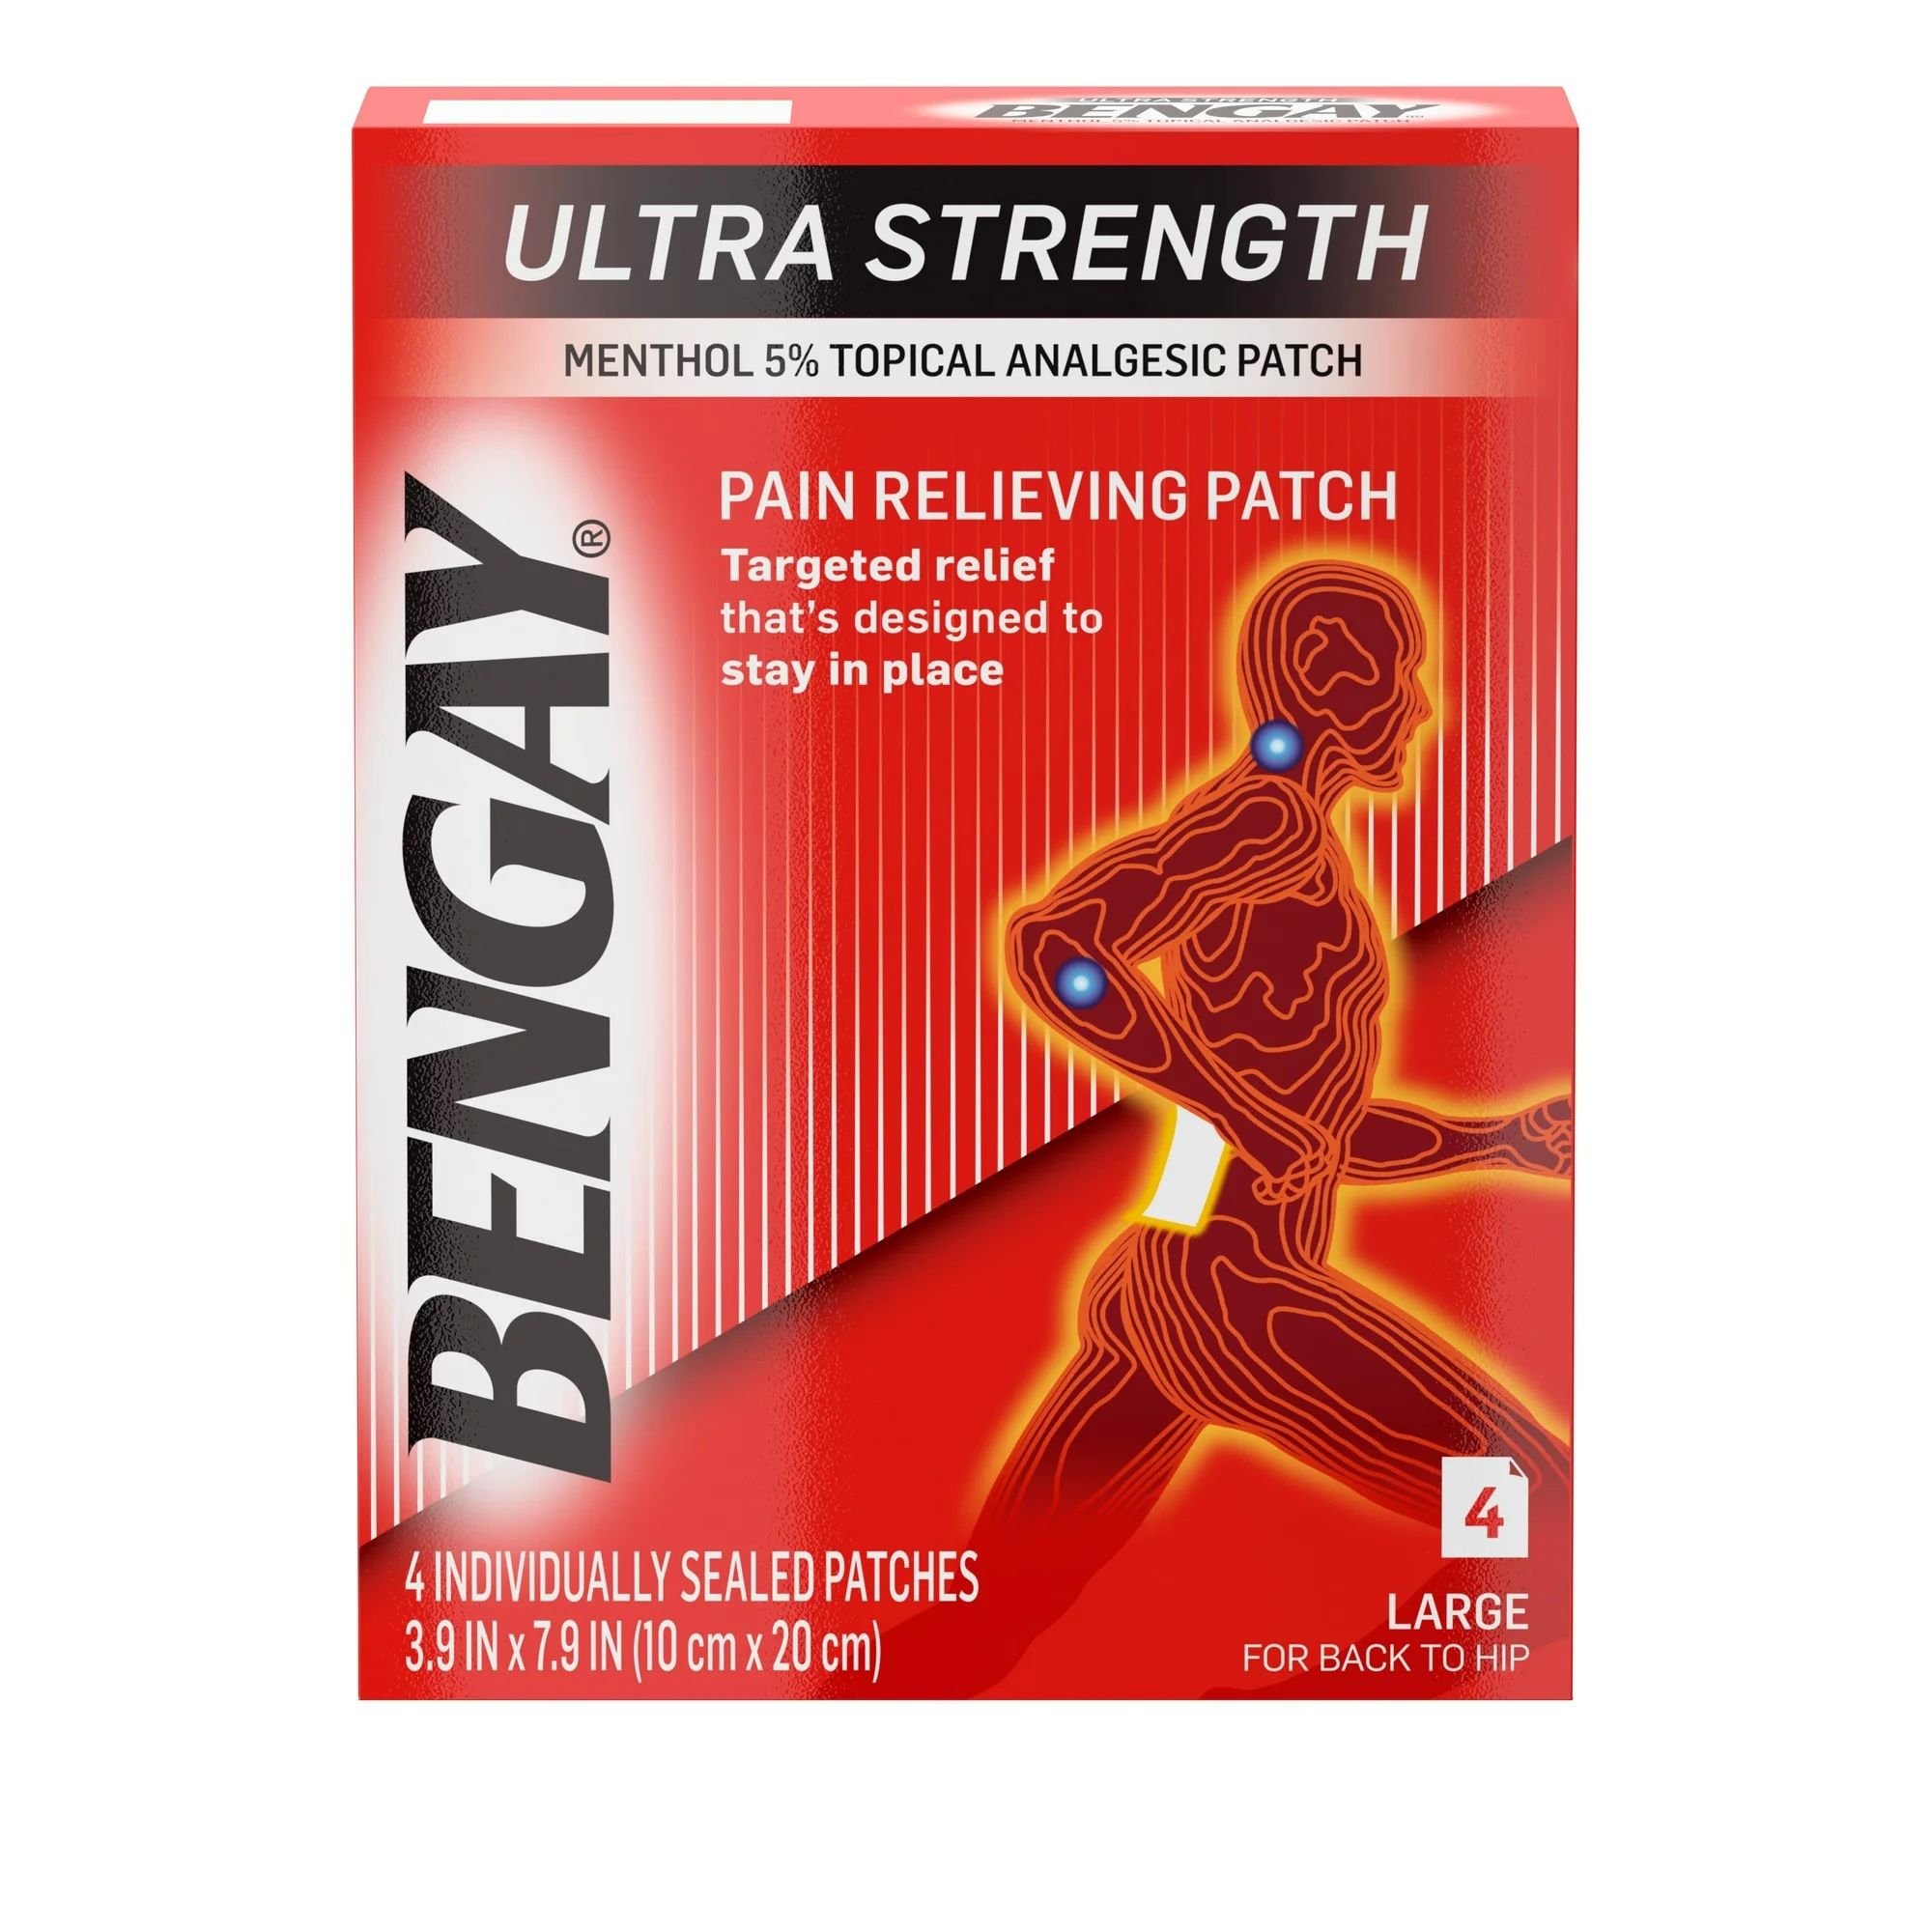 Bengay Ultra Strength Pain Relief Patch, Large - 4 ct